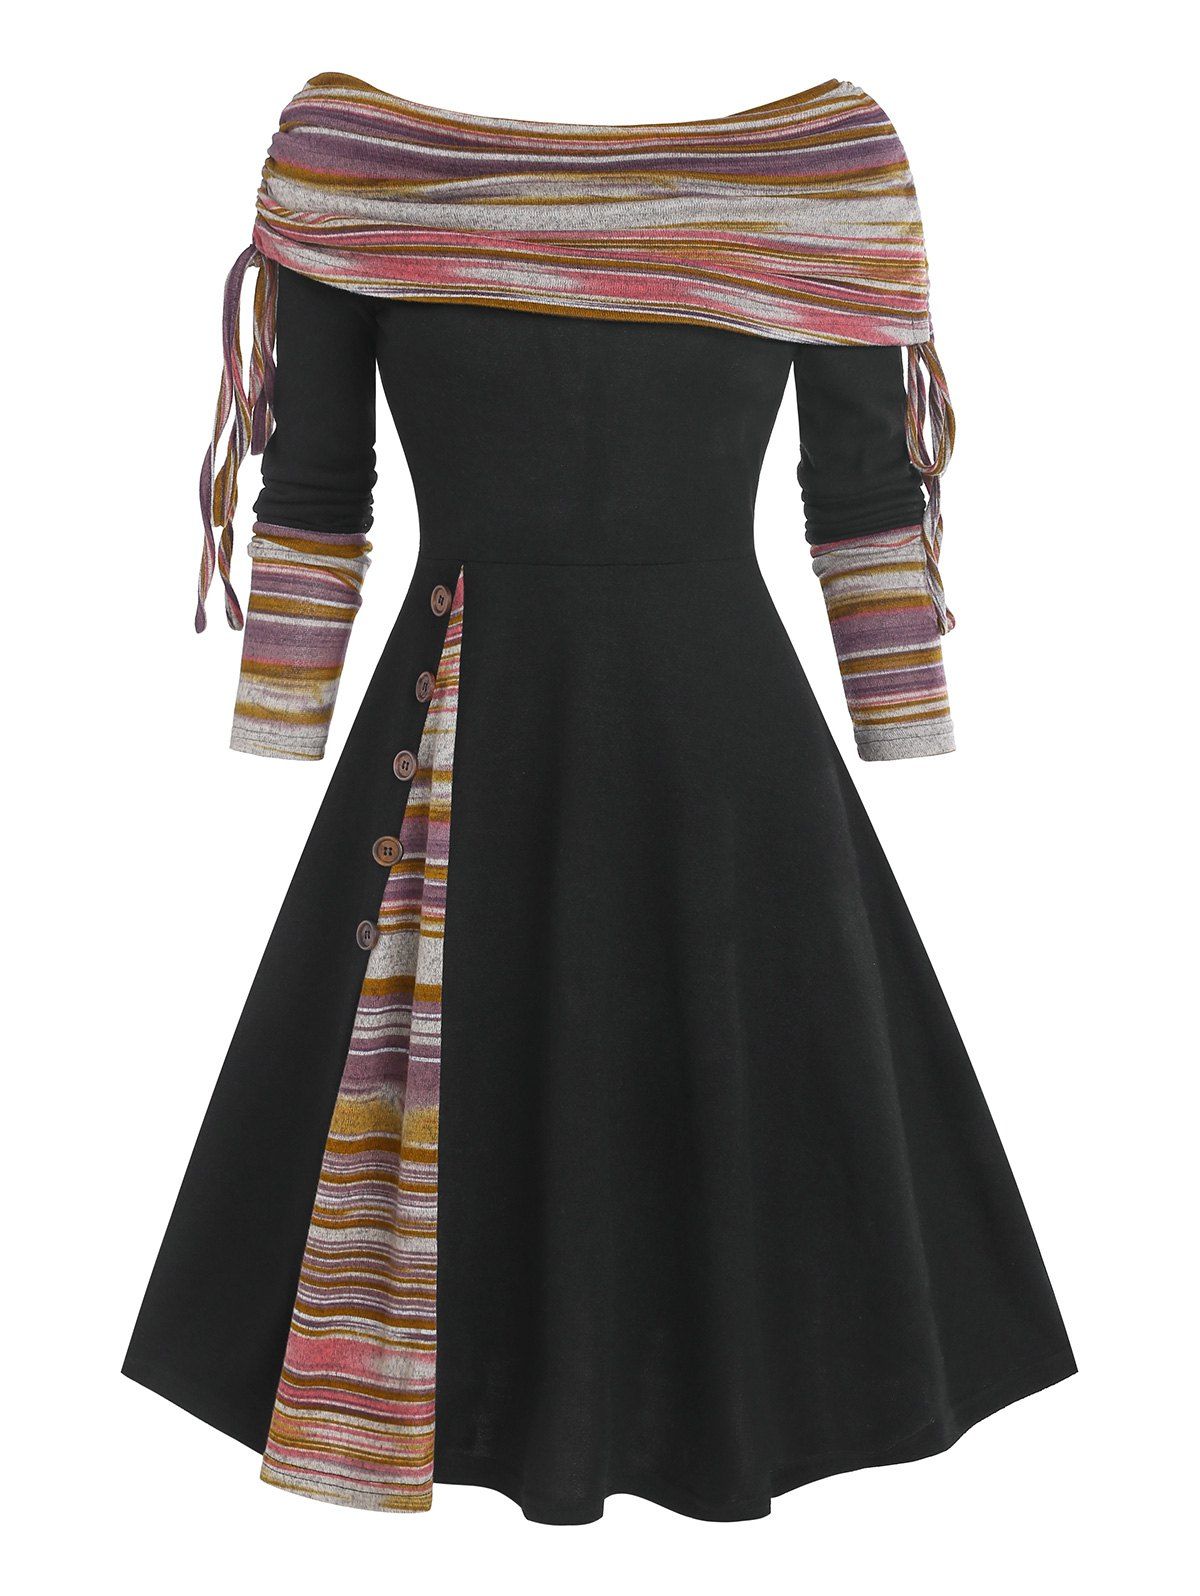 Convertible Neck Cinched Striped Flare Dress - BLACK XL